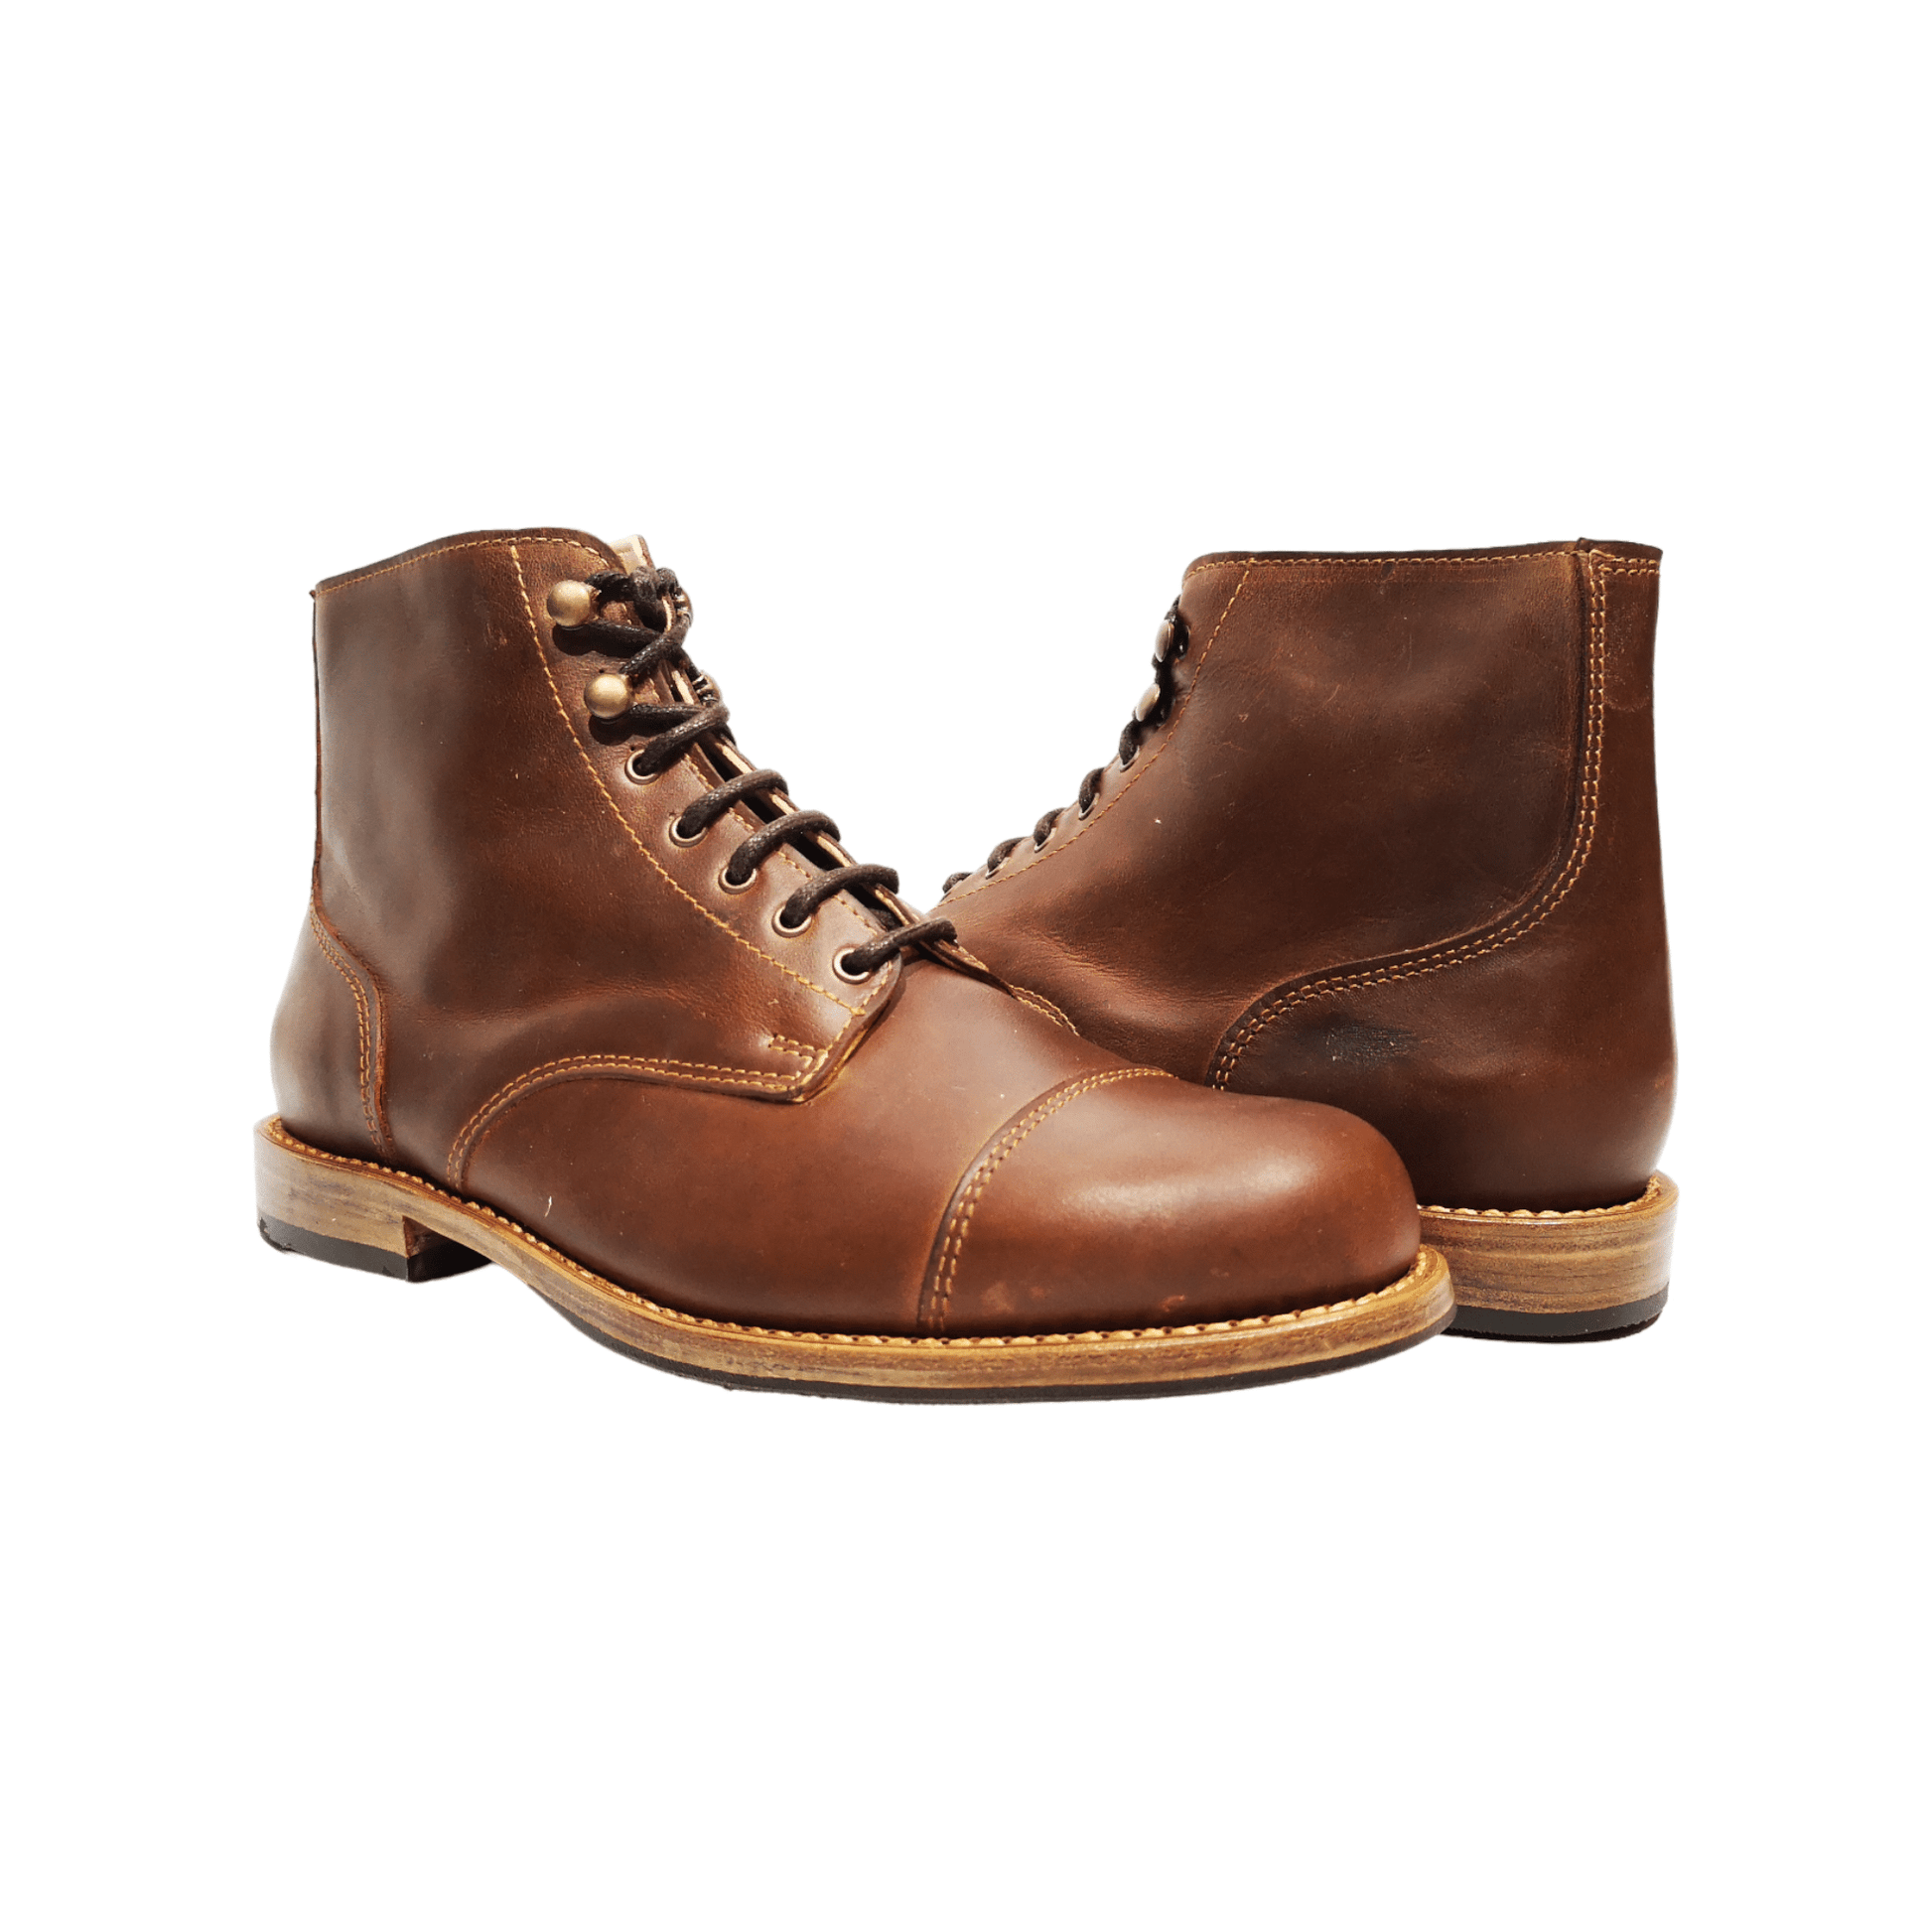 Tejo Premium Boots - OldMulla - Boots Store, Handmade By George Family